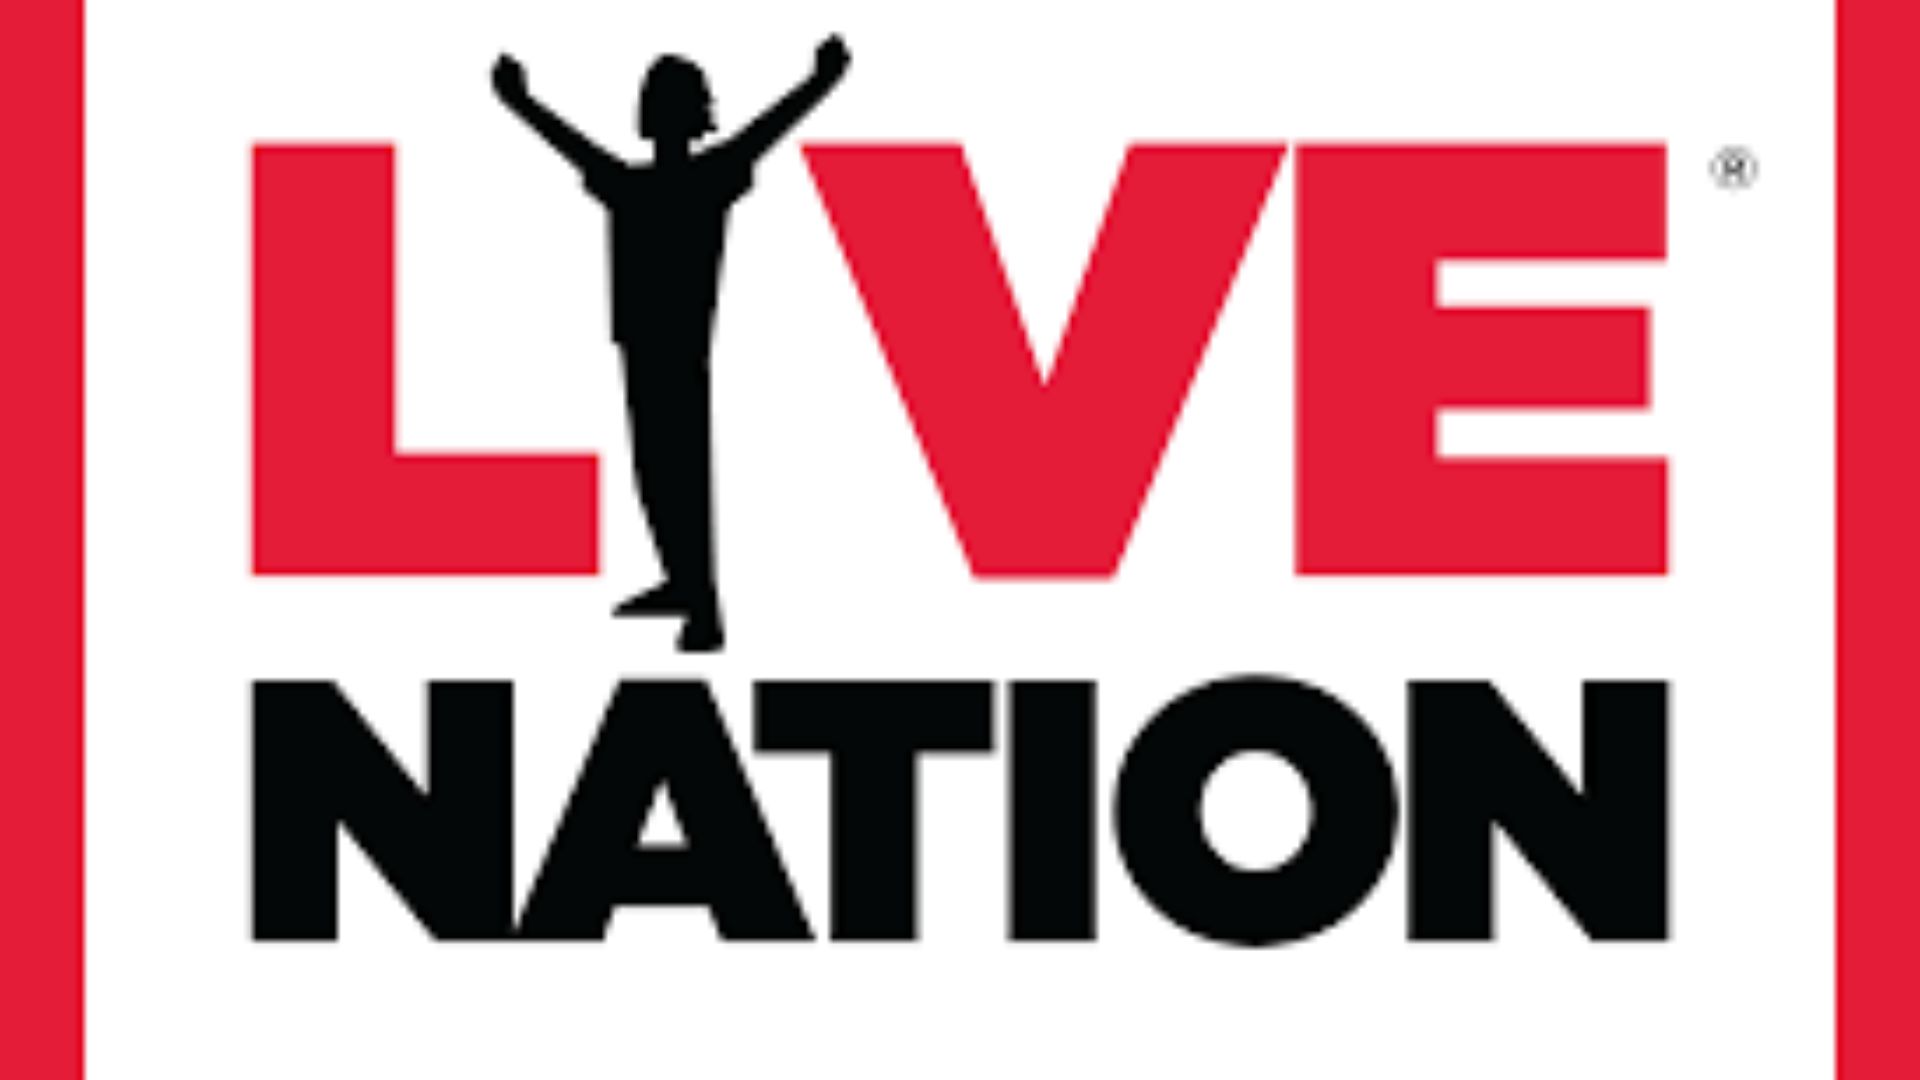 Live Nation More than 75 Live Nation events are available for $25 per ticket